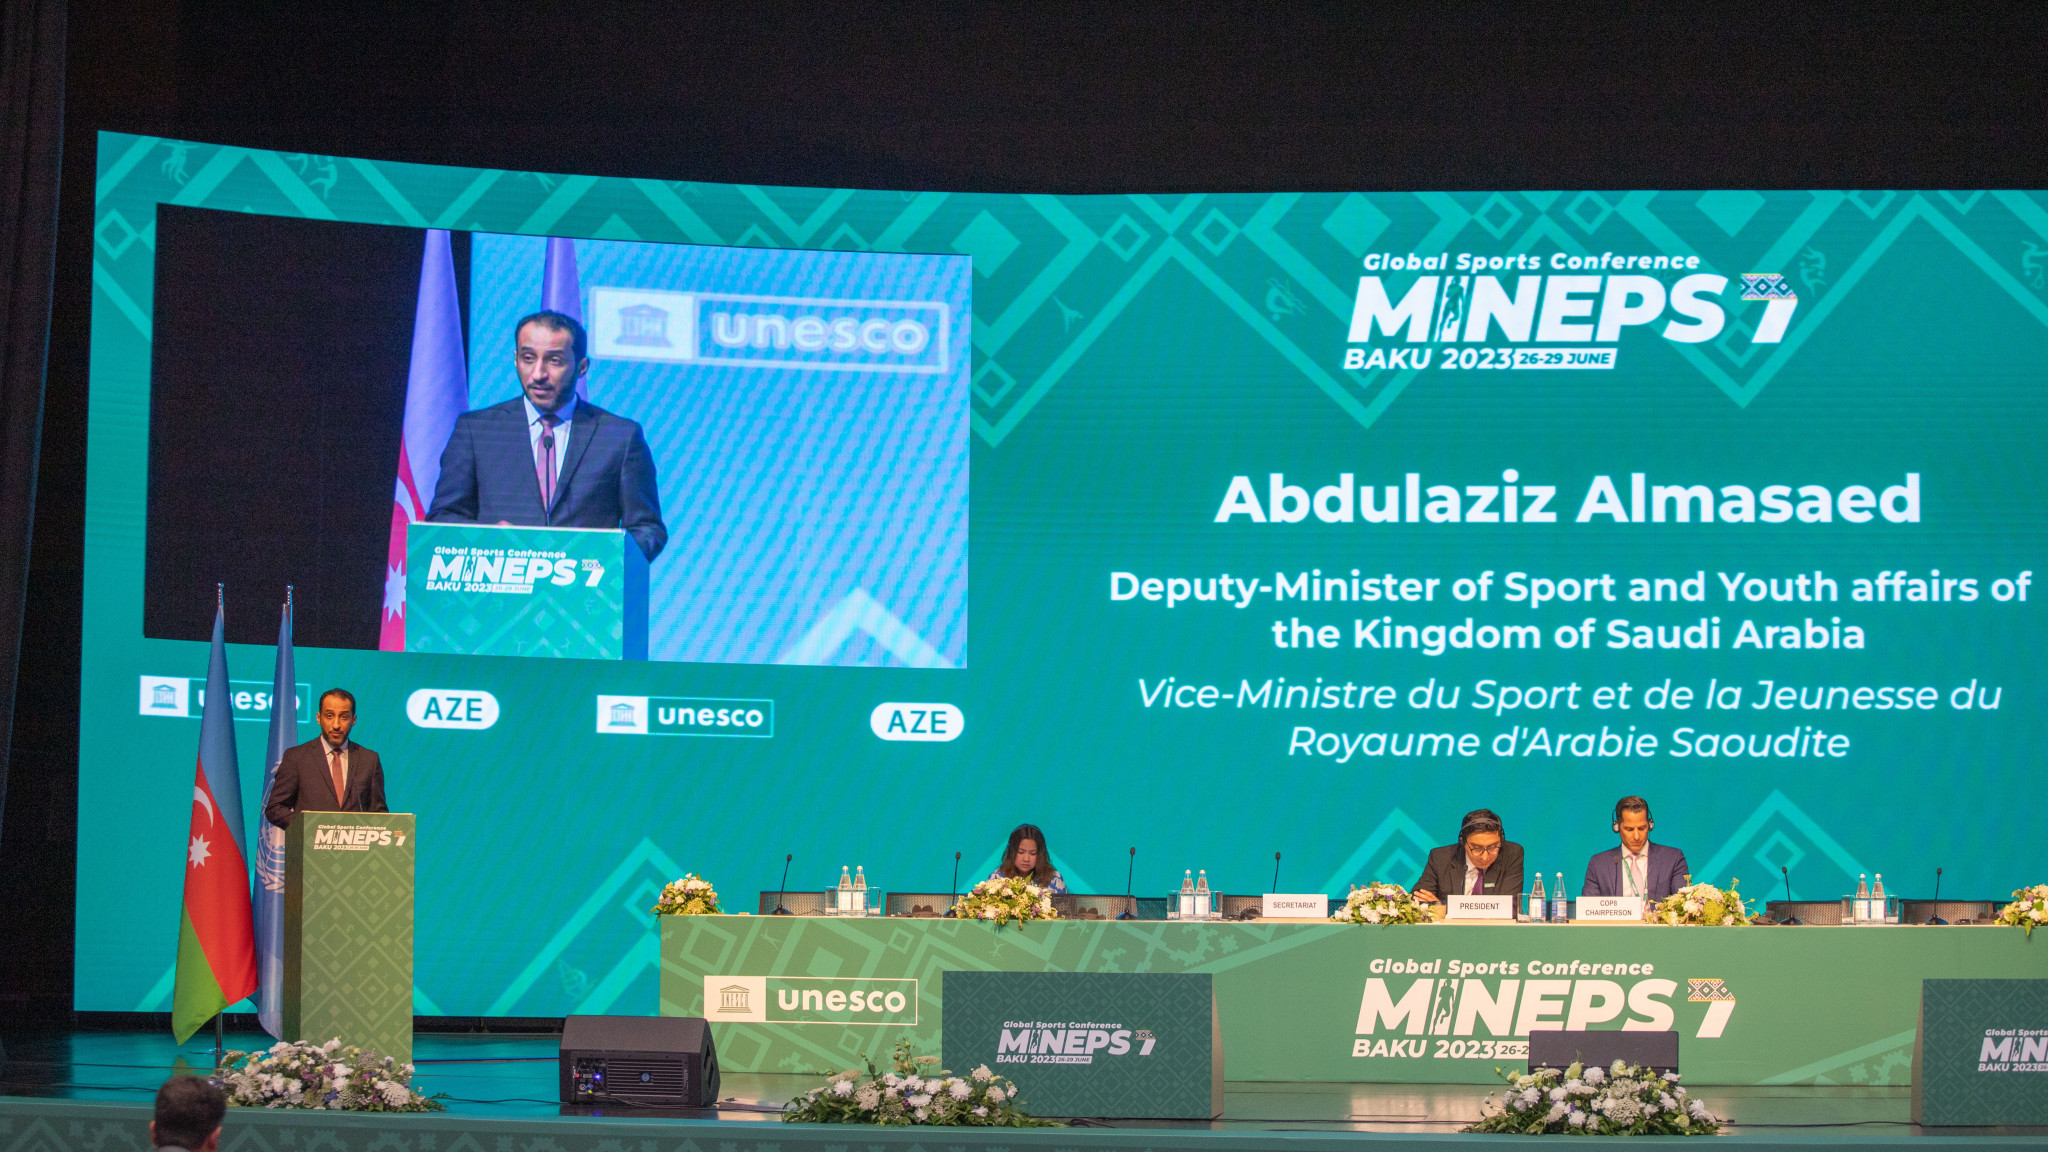 Abdulaziz Almasaed, Deputy Minister of Sport and Youth Affairs for Saudi Arabia, spoke about sport values, ethics and integrity ©MINEPS VII